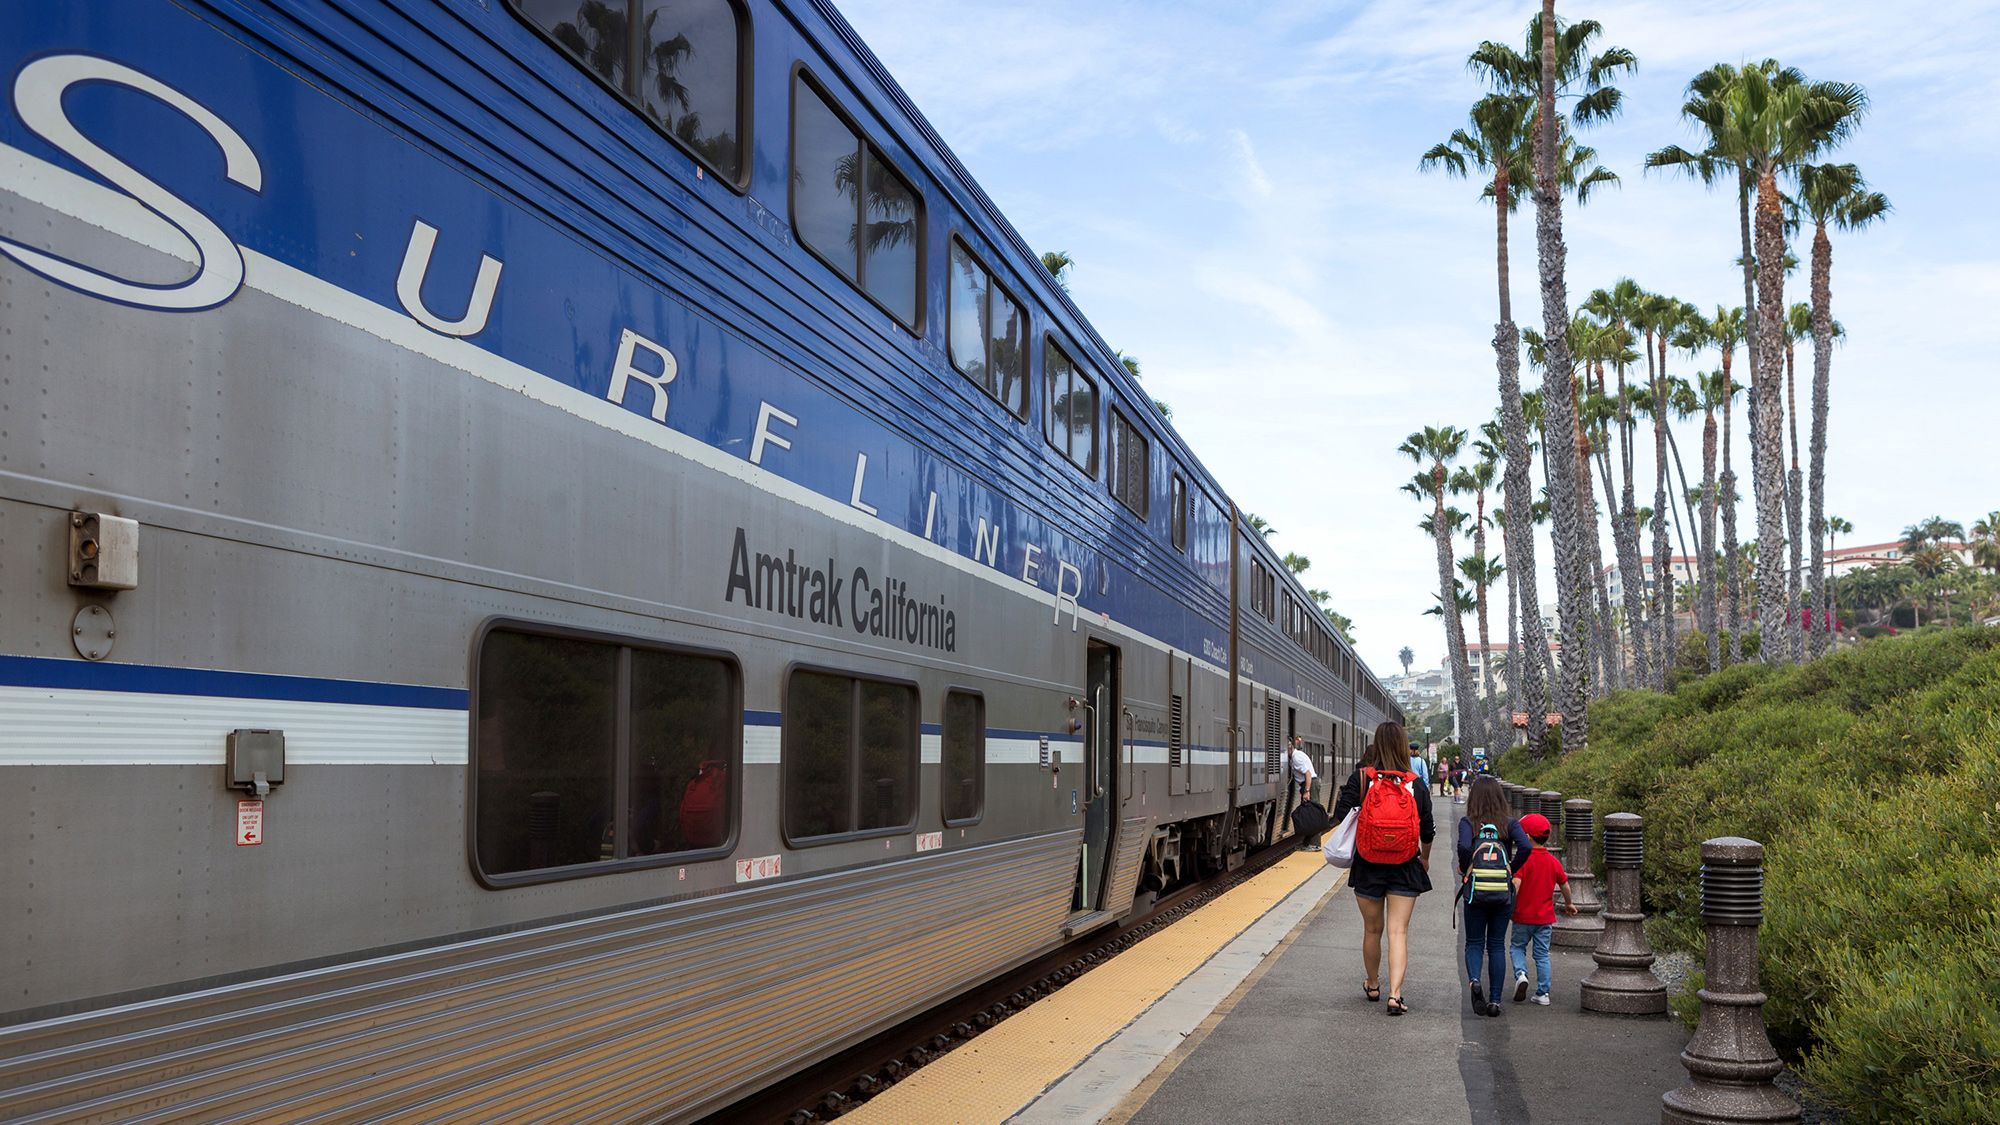 Pacific Surfliner Train from the 2000s